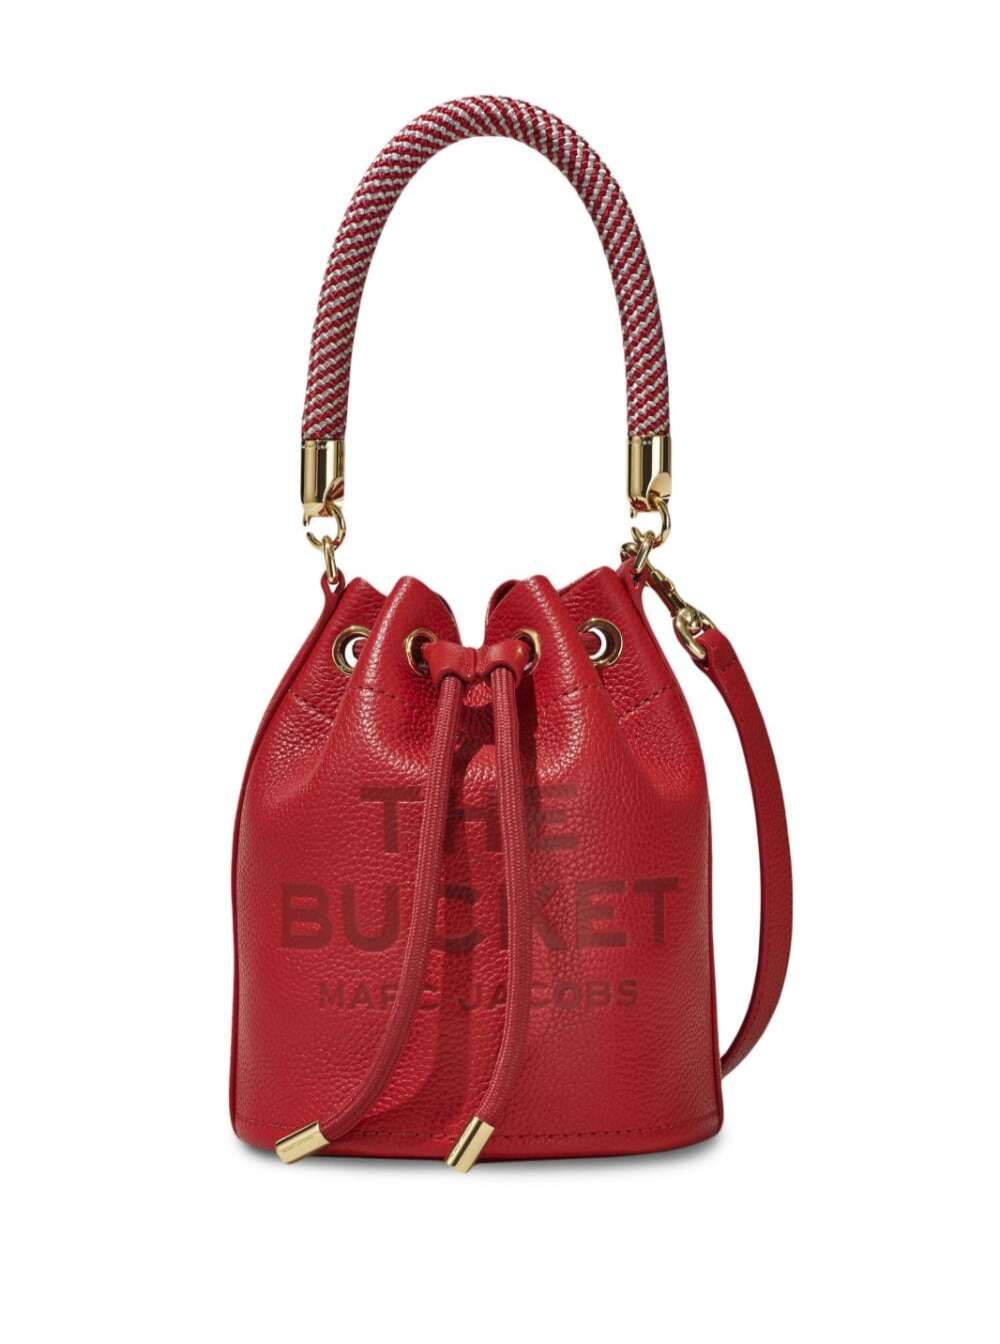 MARC JACOBS THE LEATHER BUCKET MINI RED HANDBAG WITH DRAWSTRING AND FRONT LOGO IN HAMMERED LEATHER WOMAN